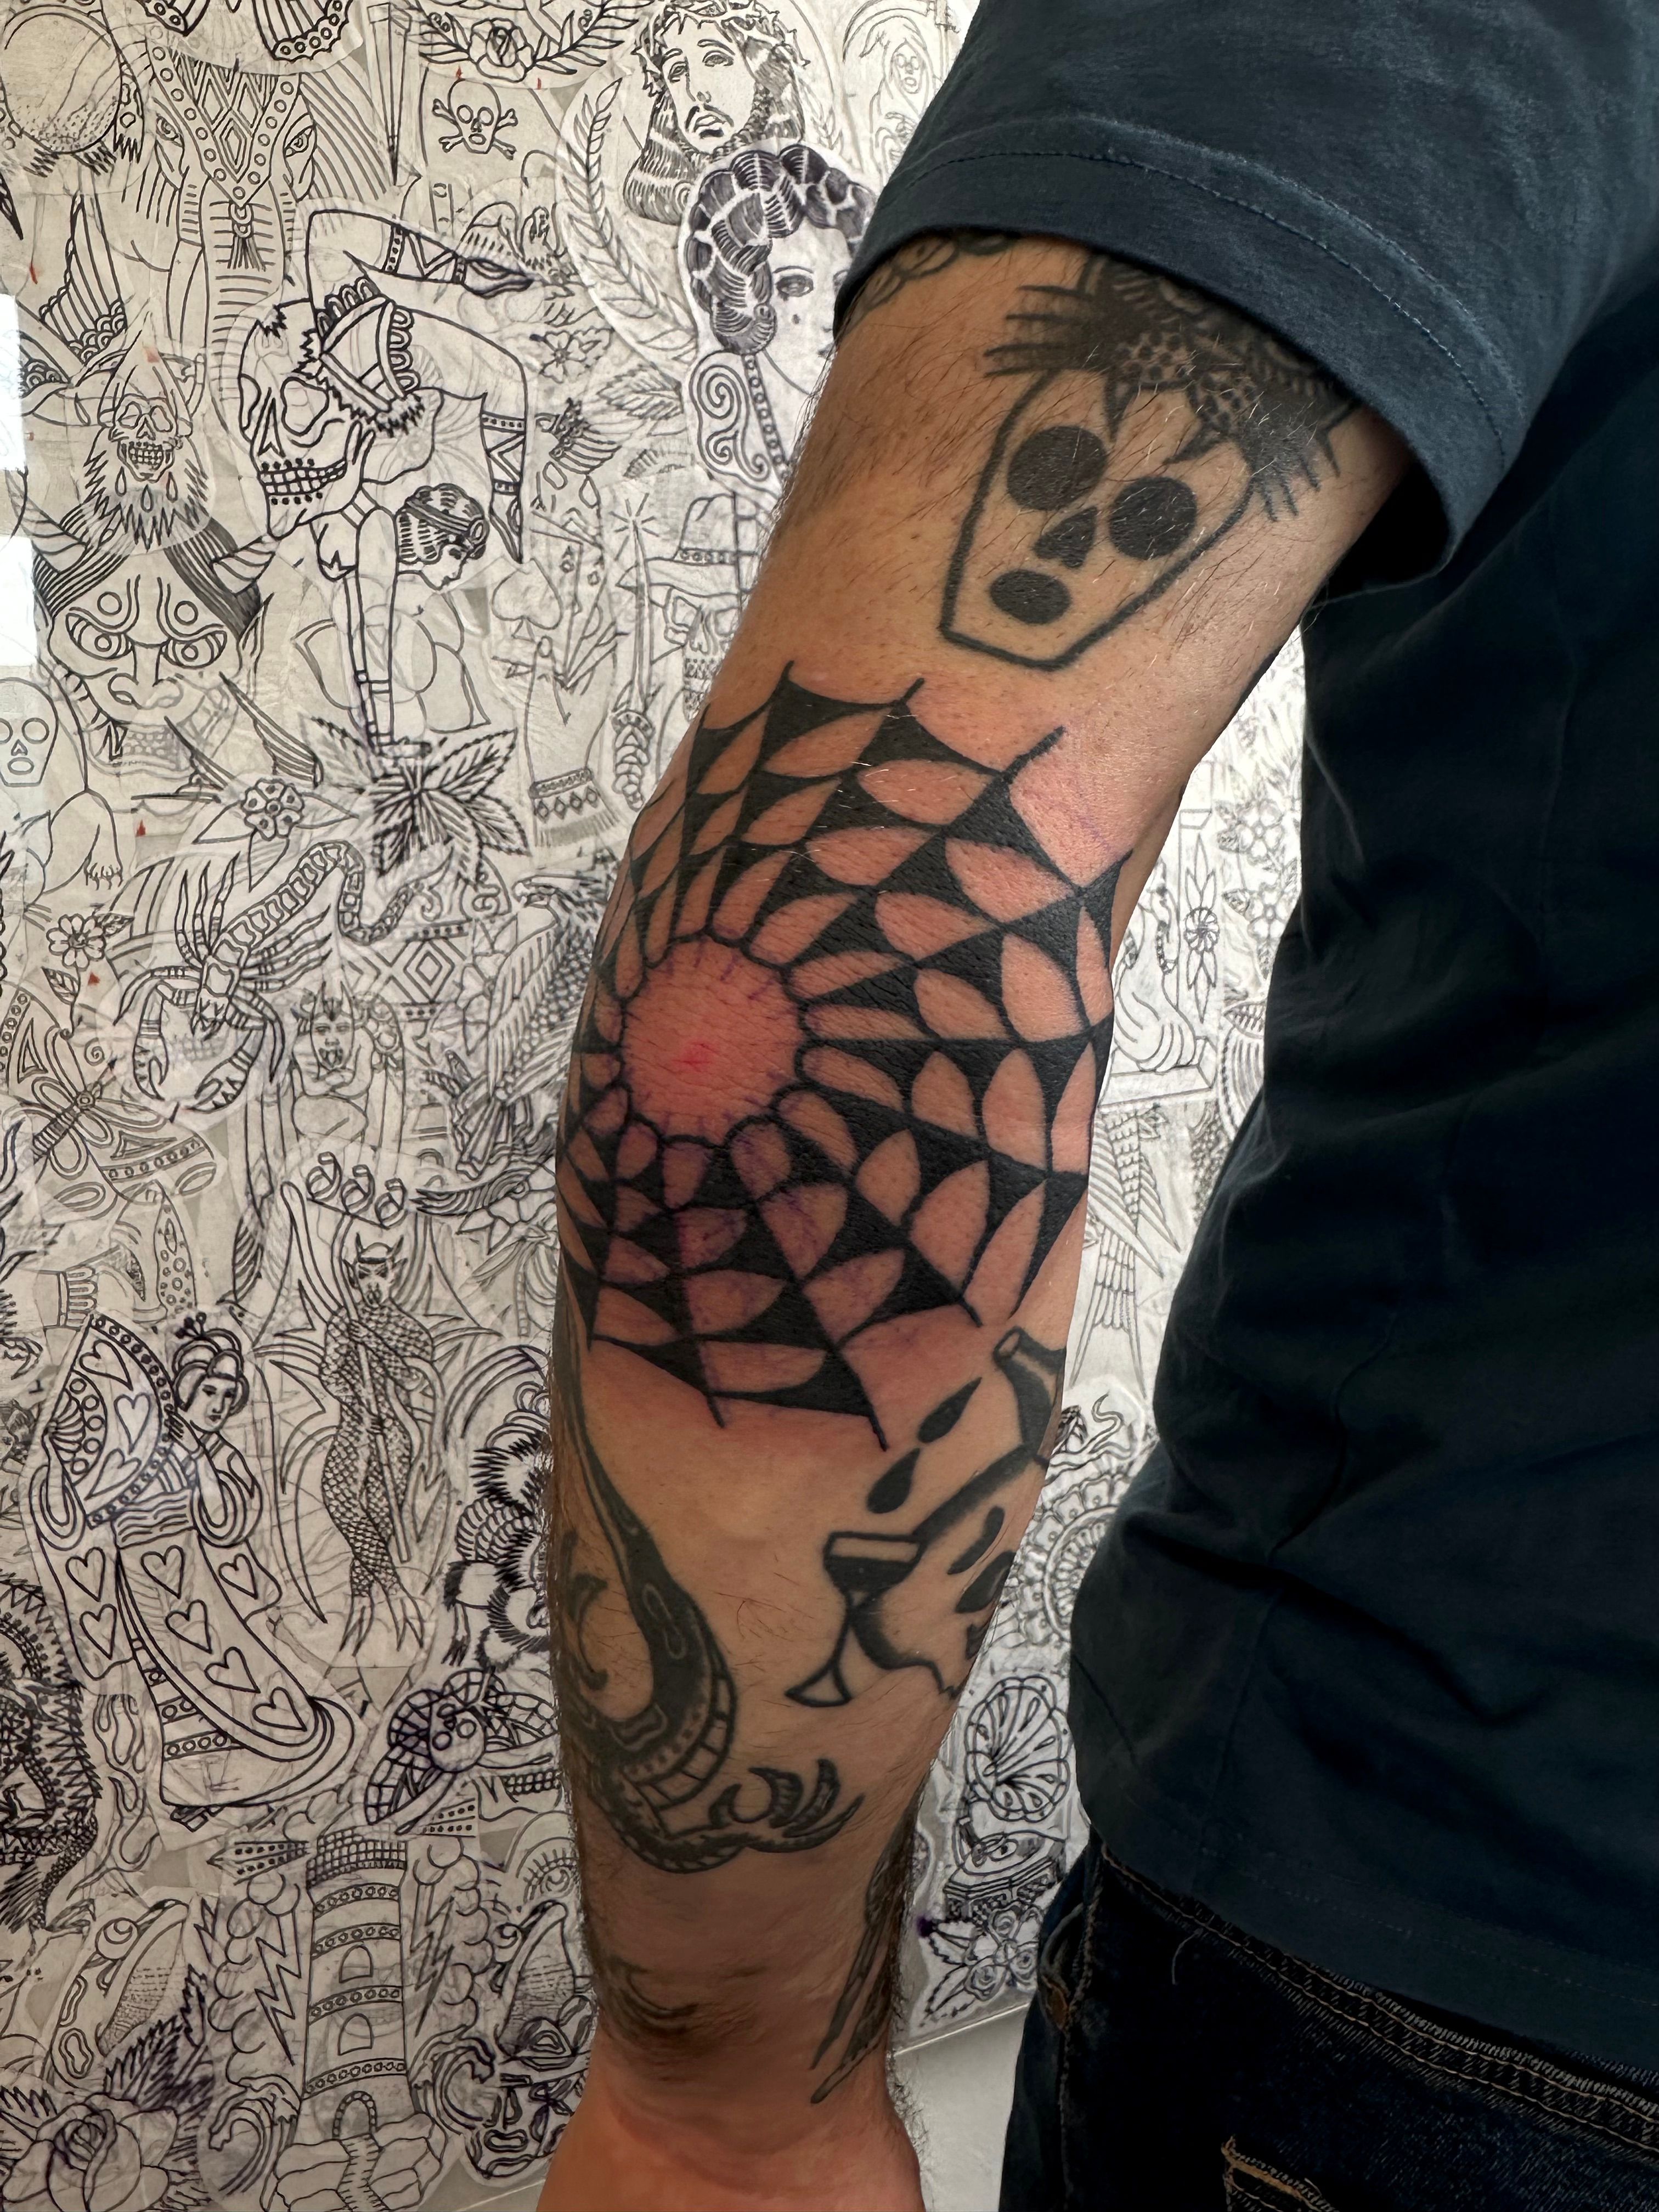 What Are Neo Traditional Tattoos? 45 Best Neo Traditional Tattoo Ideas &  Designs | YourTango